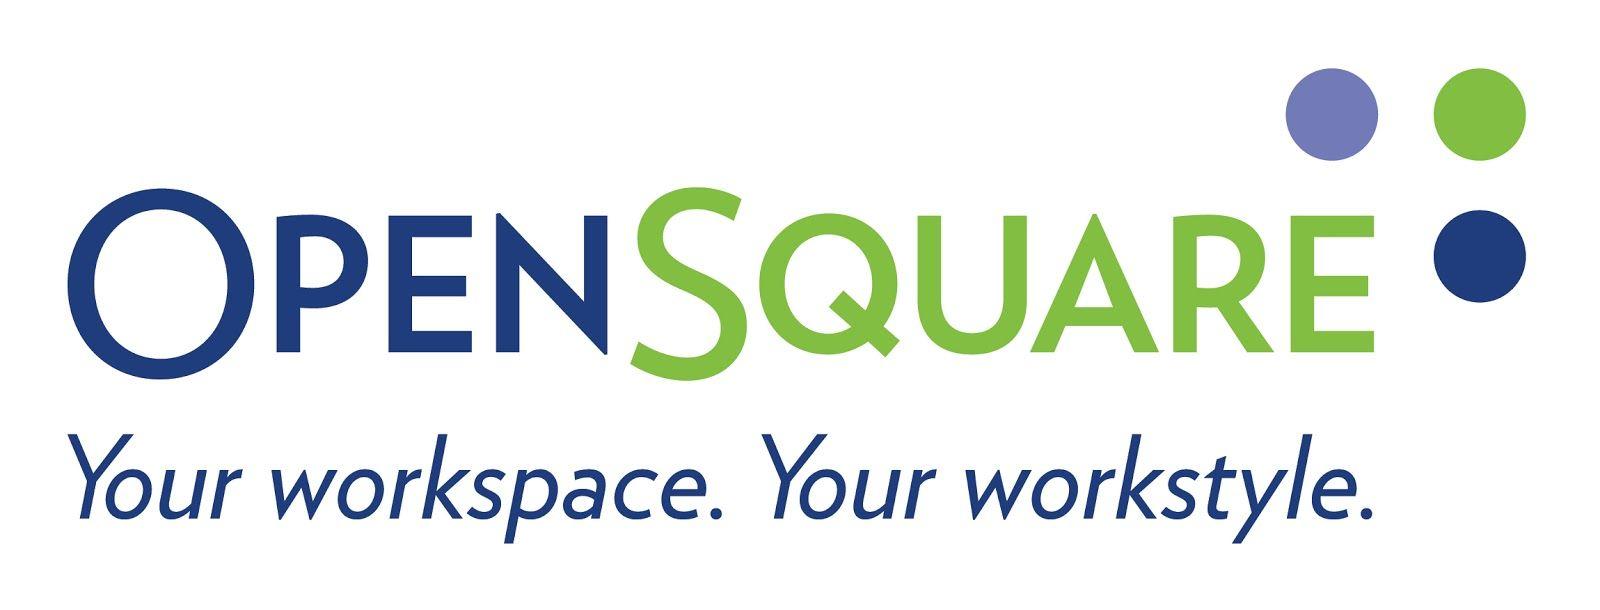 Open Square Logo - Introducing OpenSquare, formerly B&OI + BarclayDean. Better Together ...